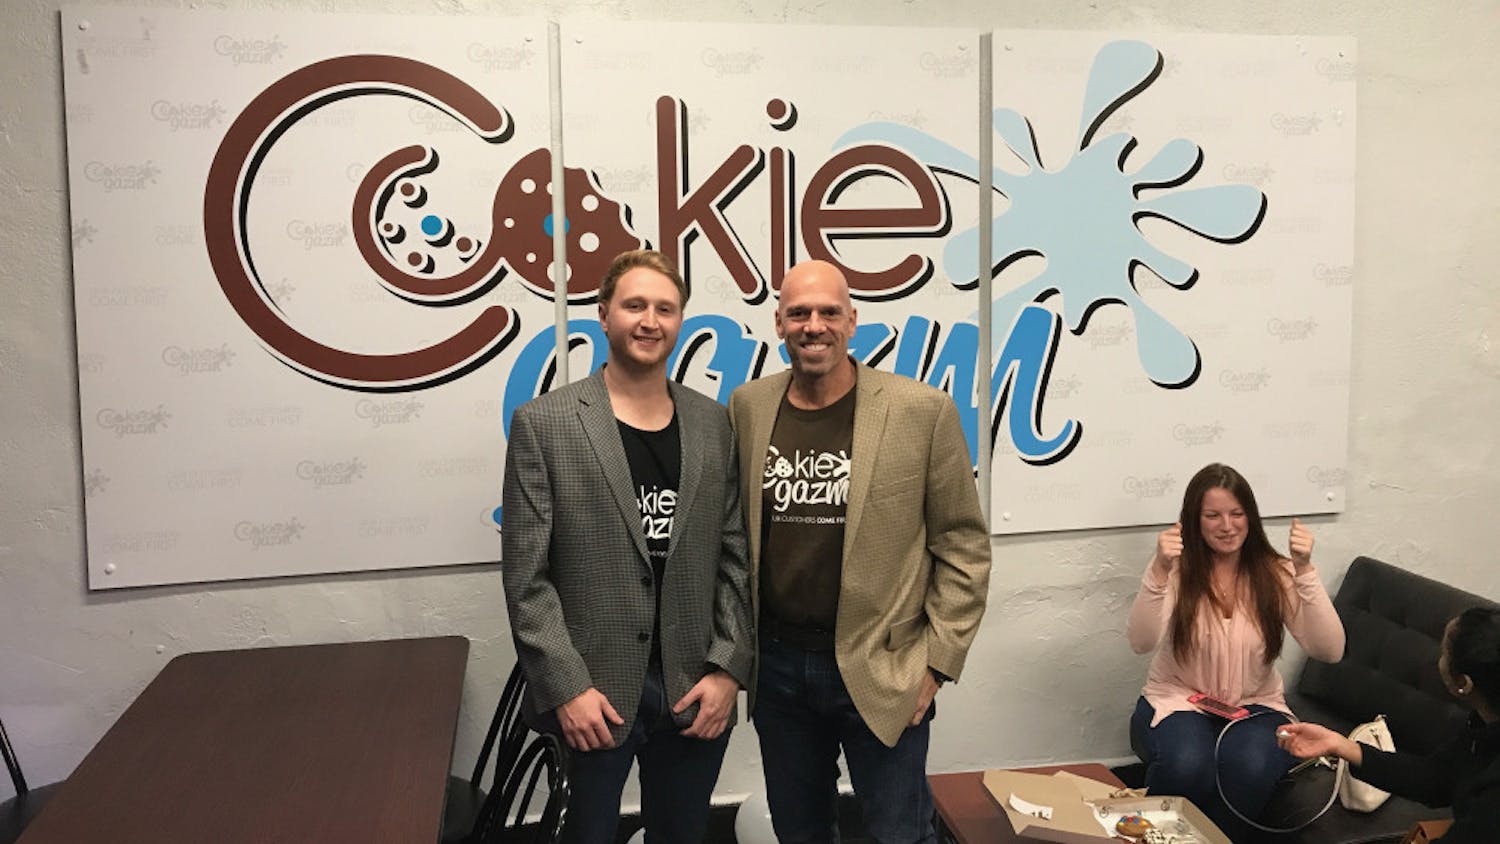 Aaron Seemann, owner, and Jose Benacerraf, partner and investor, celebrate the opening of Cookiegazm’s new store located in downtown Gainesville.